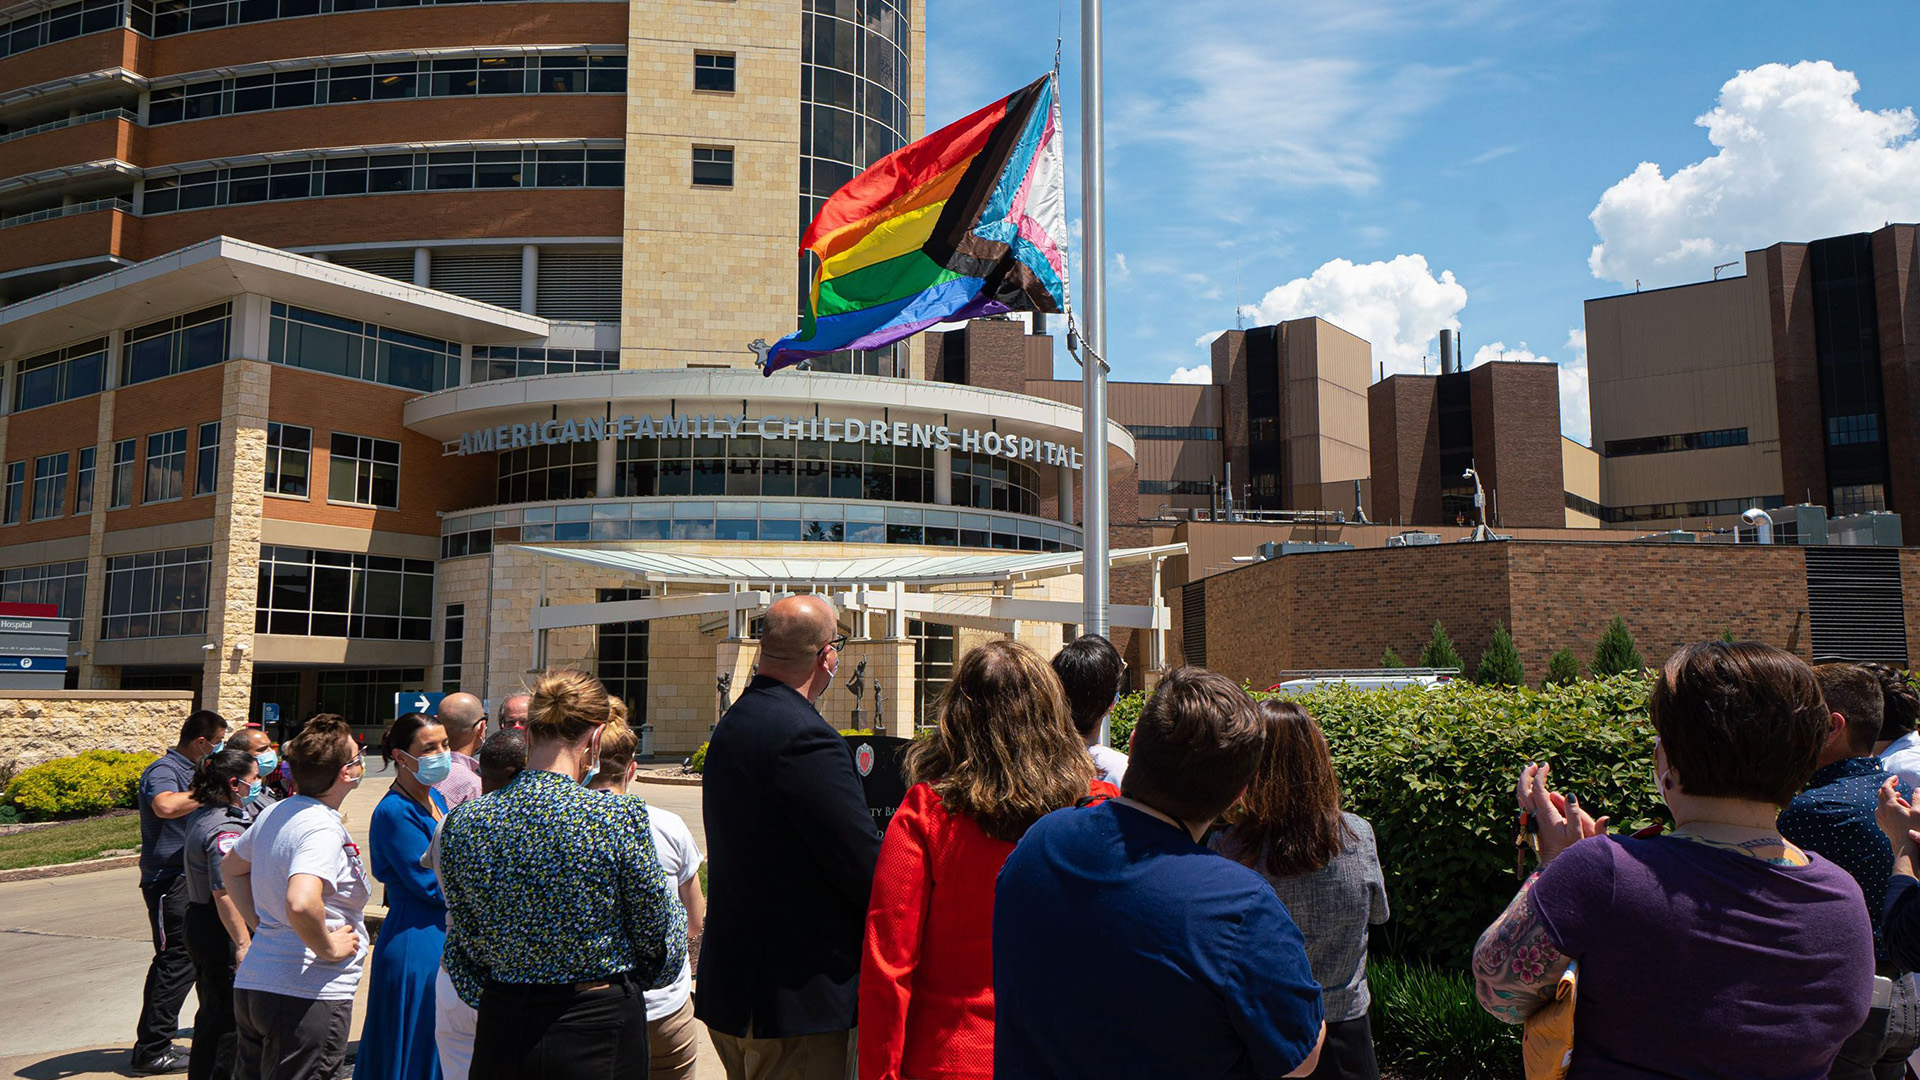 People watch and applaud as the Progress Pride flag is raised on a flagpole in front of a group of buildings, with a letter sign above one entrance reading "American Family Children's Hospital."